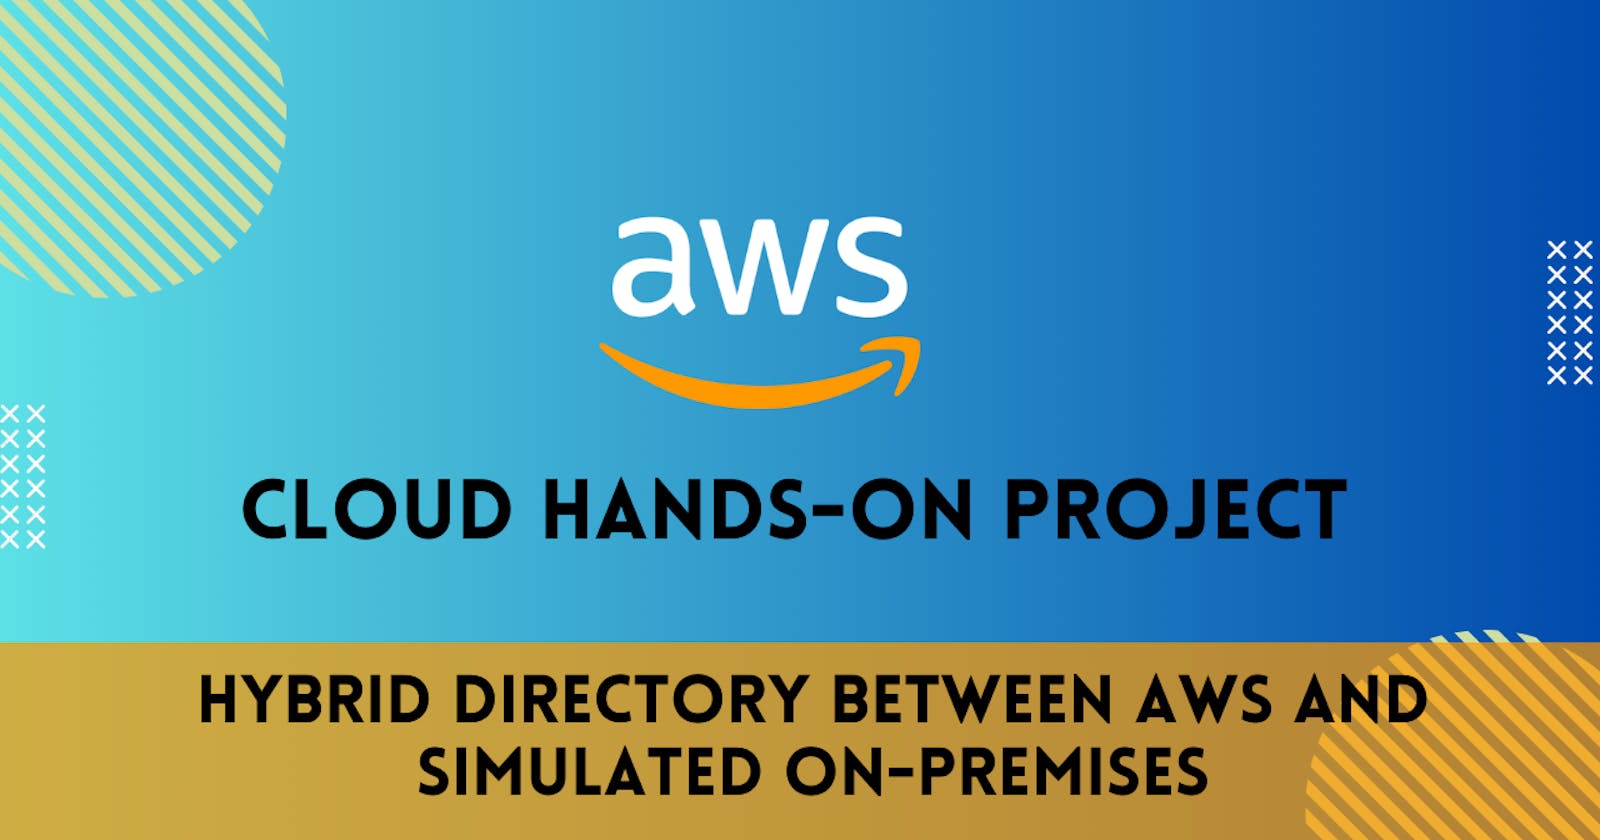 Hybrid Directory between AWS and Simulated On-Premises